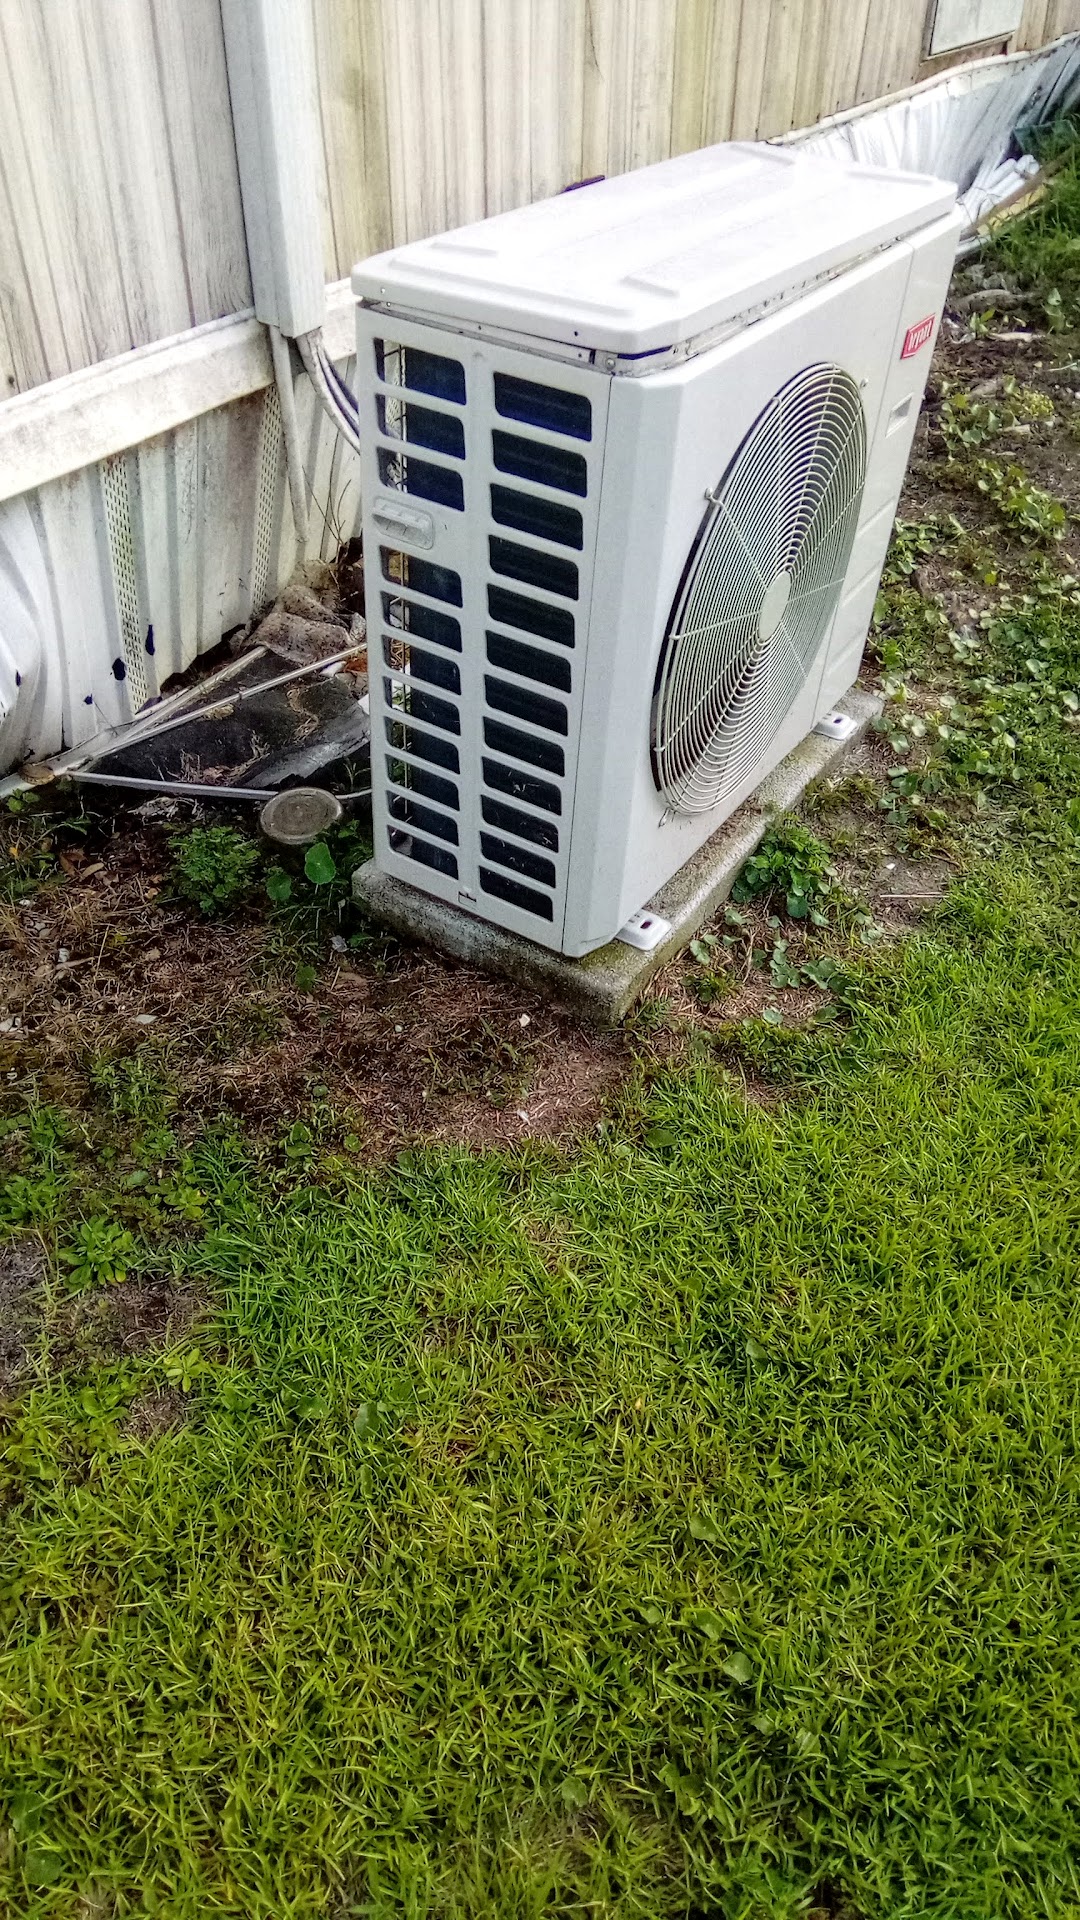 Four Star Plumbing and Air Conditioning